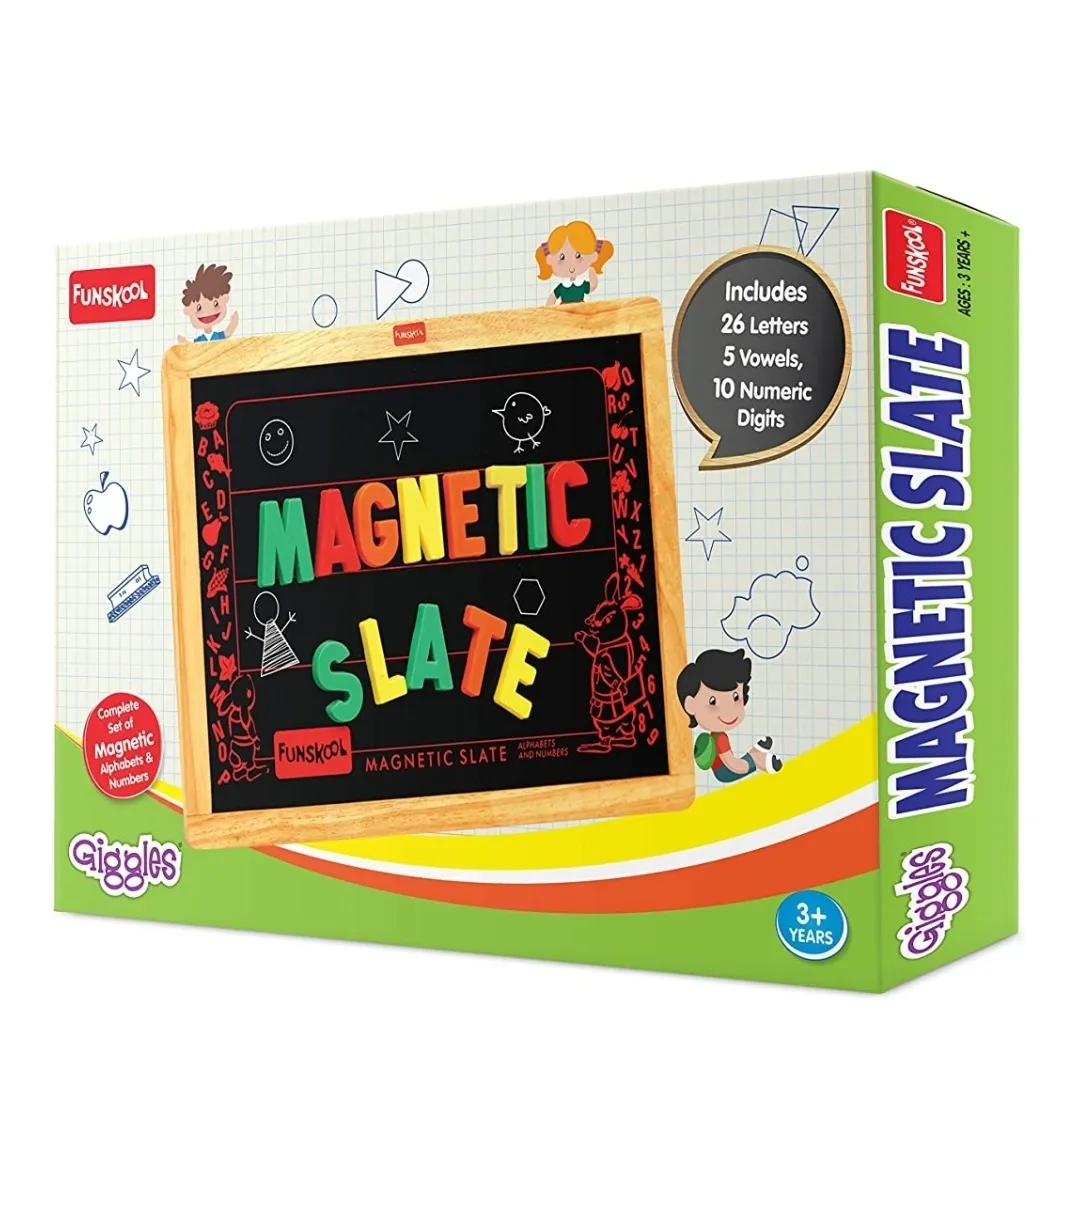 Funskool Giggles Magnetic Slate Complete Set of Alphabets and Numbers